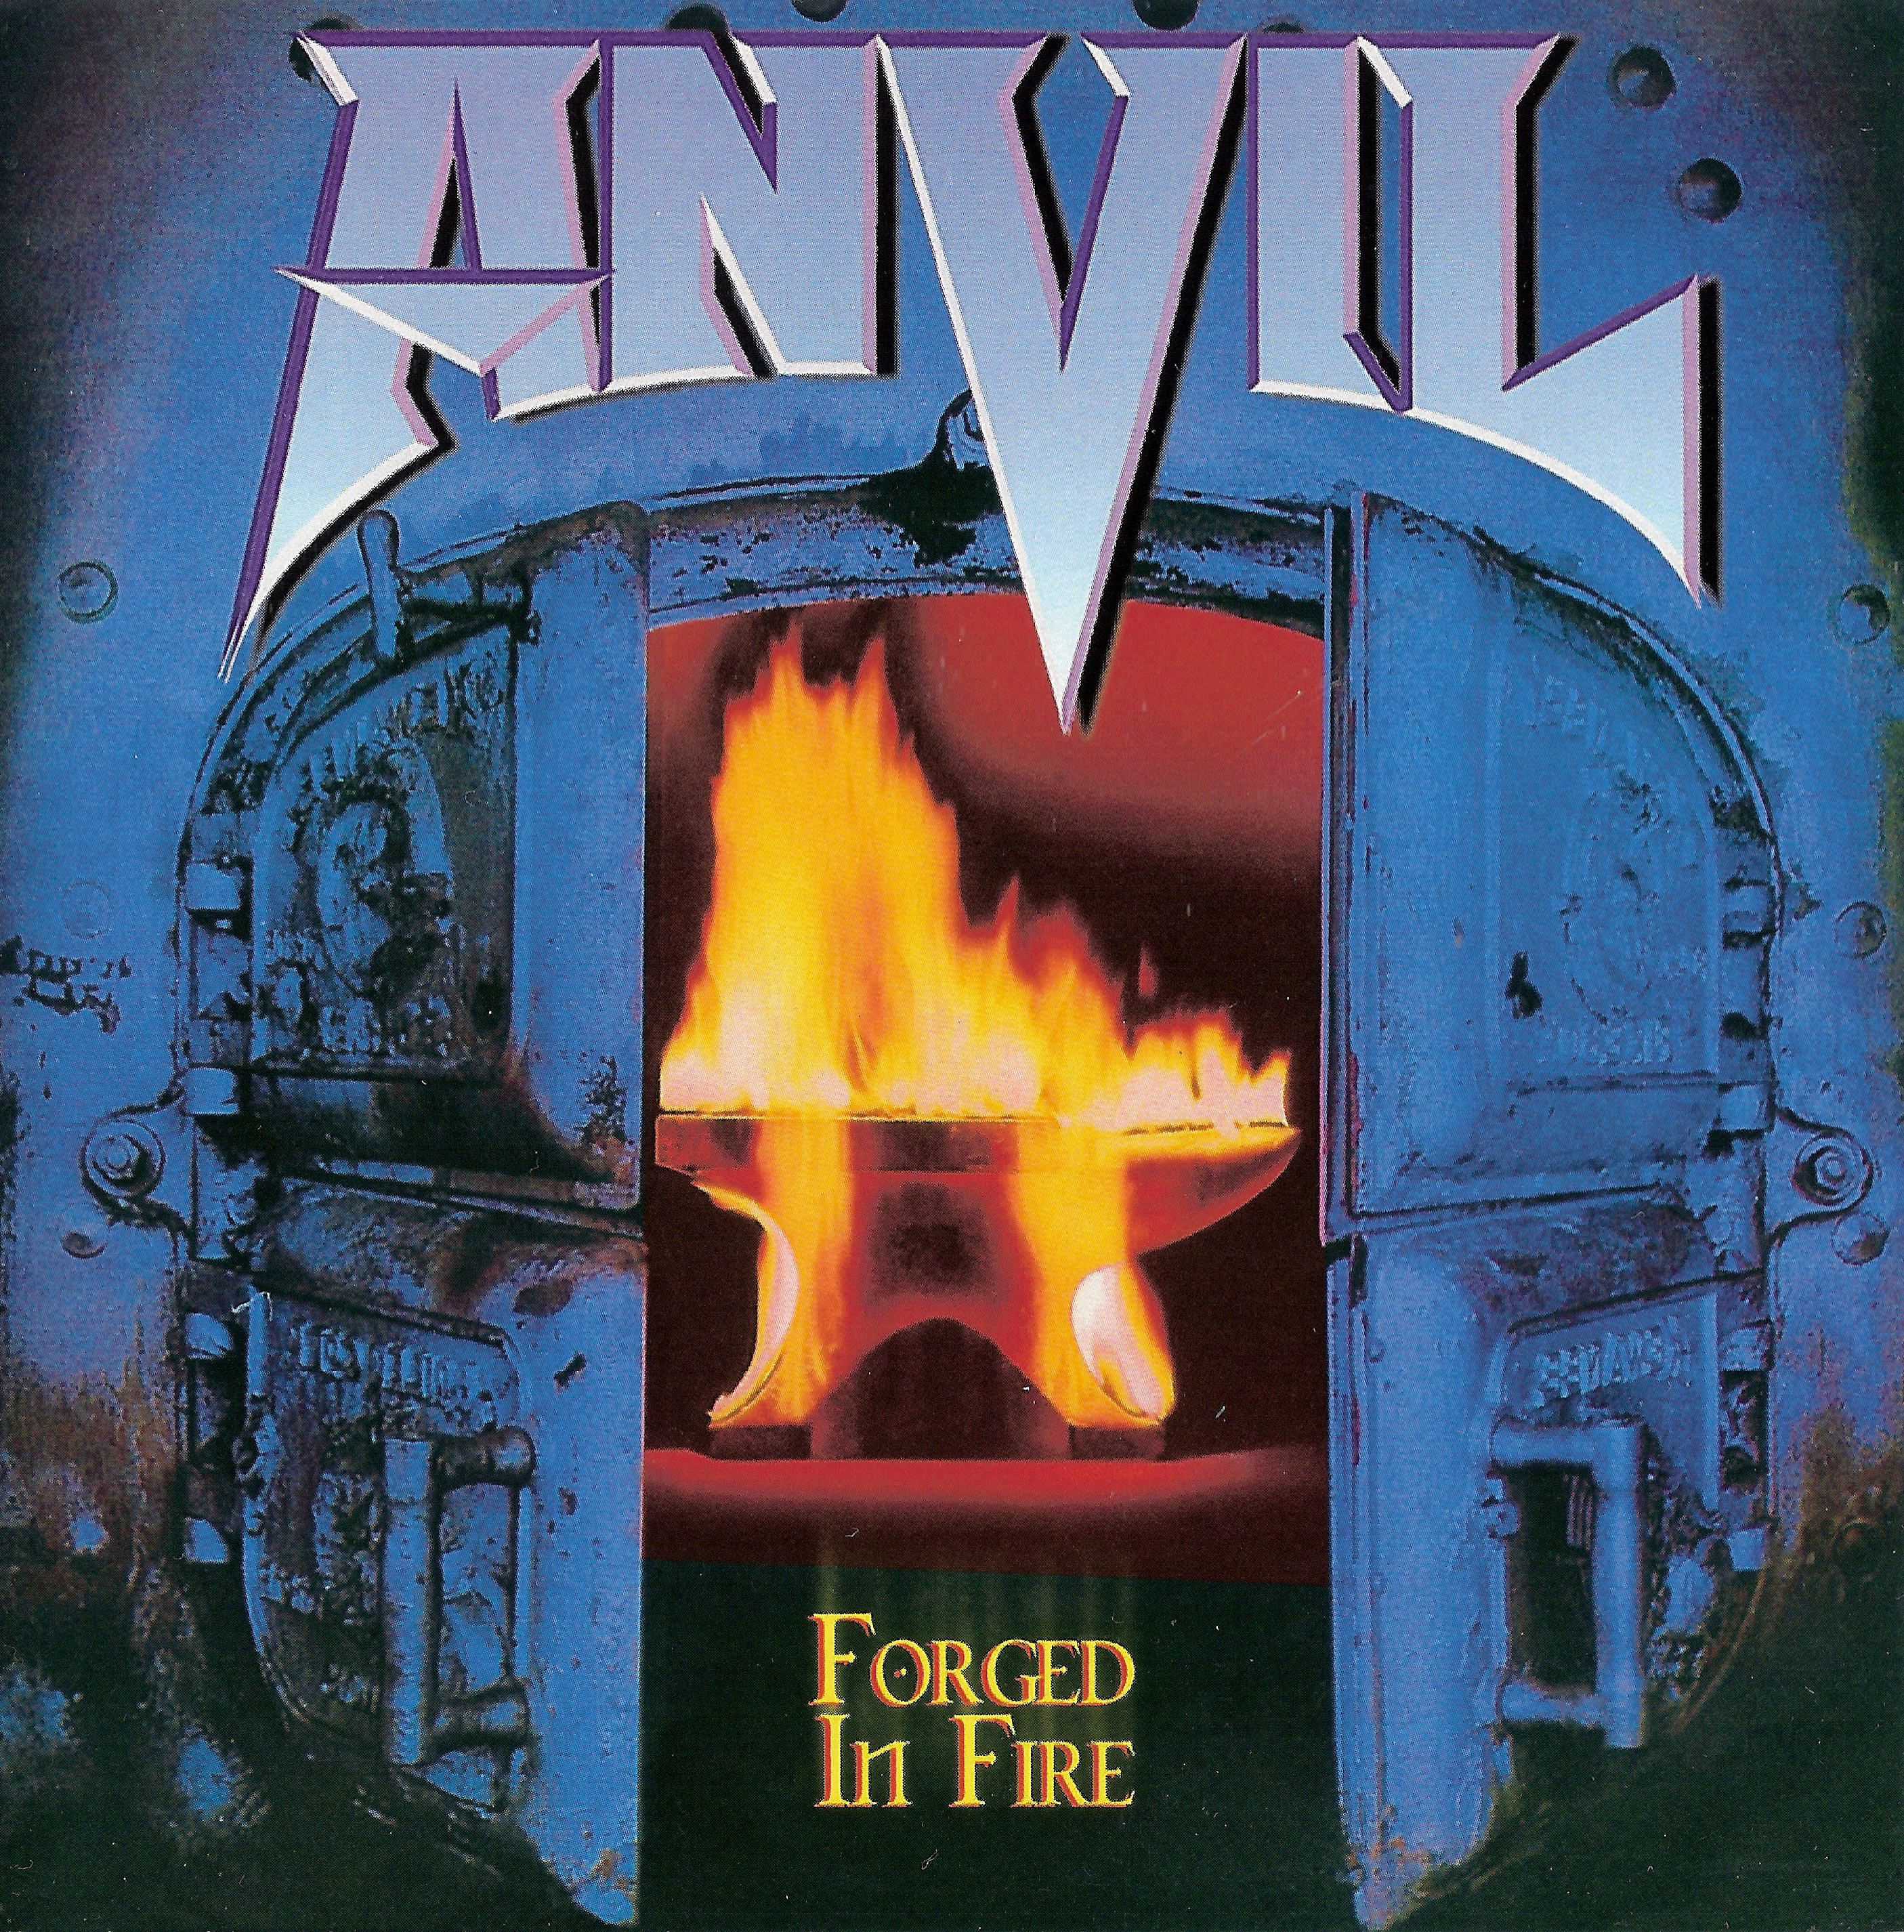 Anvil - Discography (1981 - 2016)